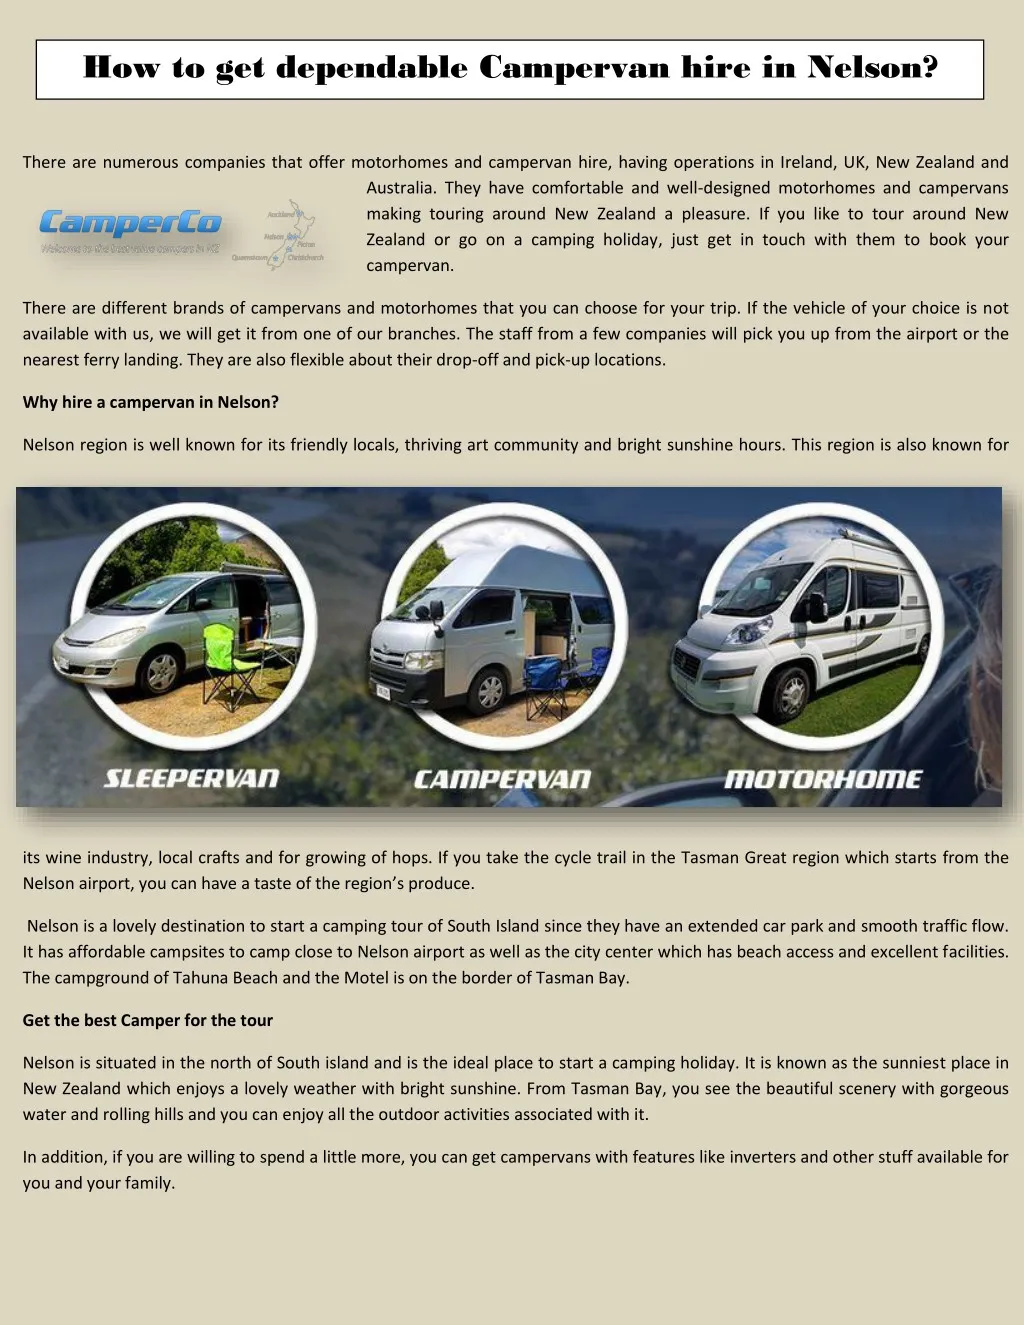 how to get dependable campervan hire in nelson